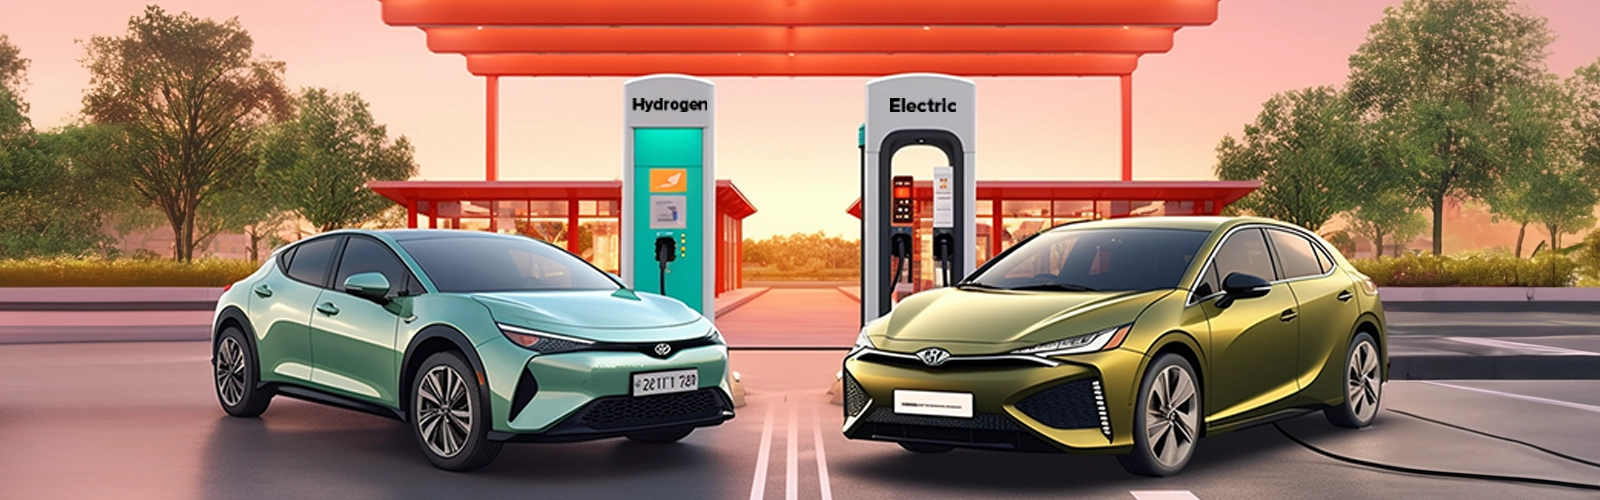 Electric Cars or Hydrogen Cars: Which is Better?